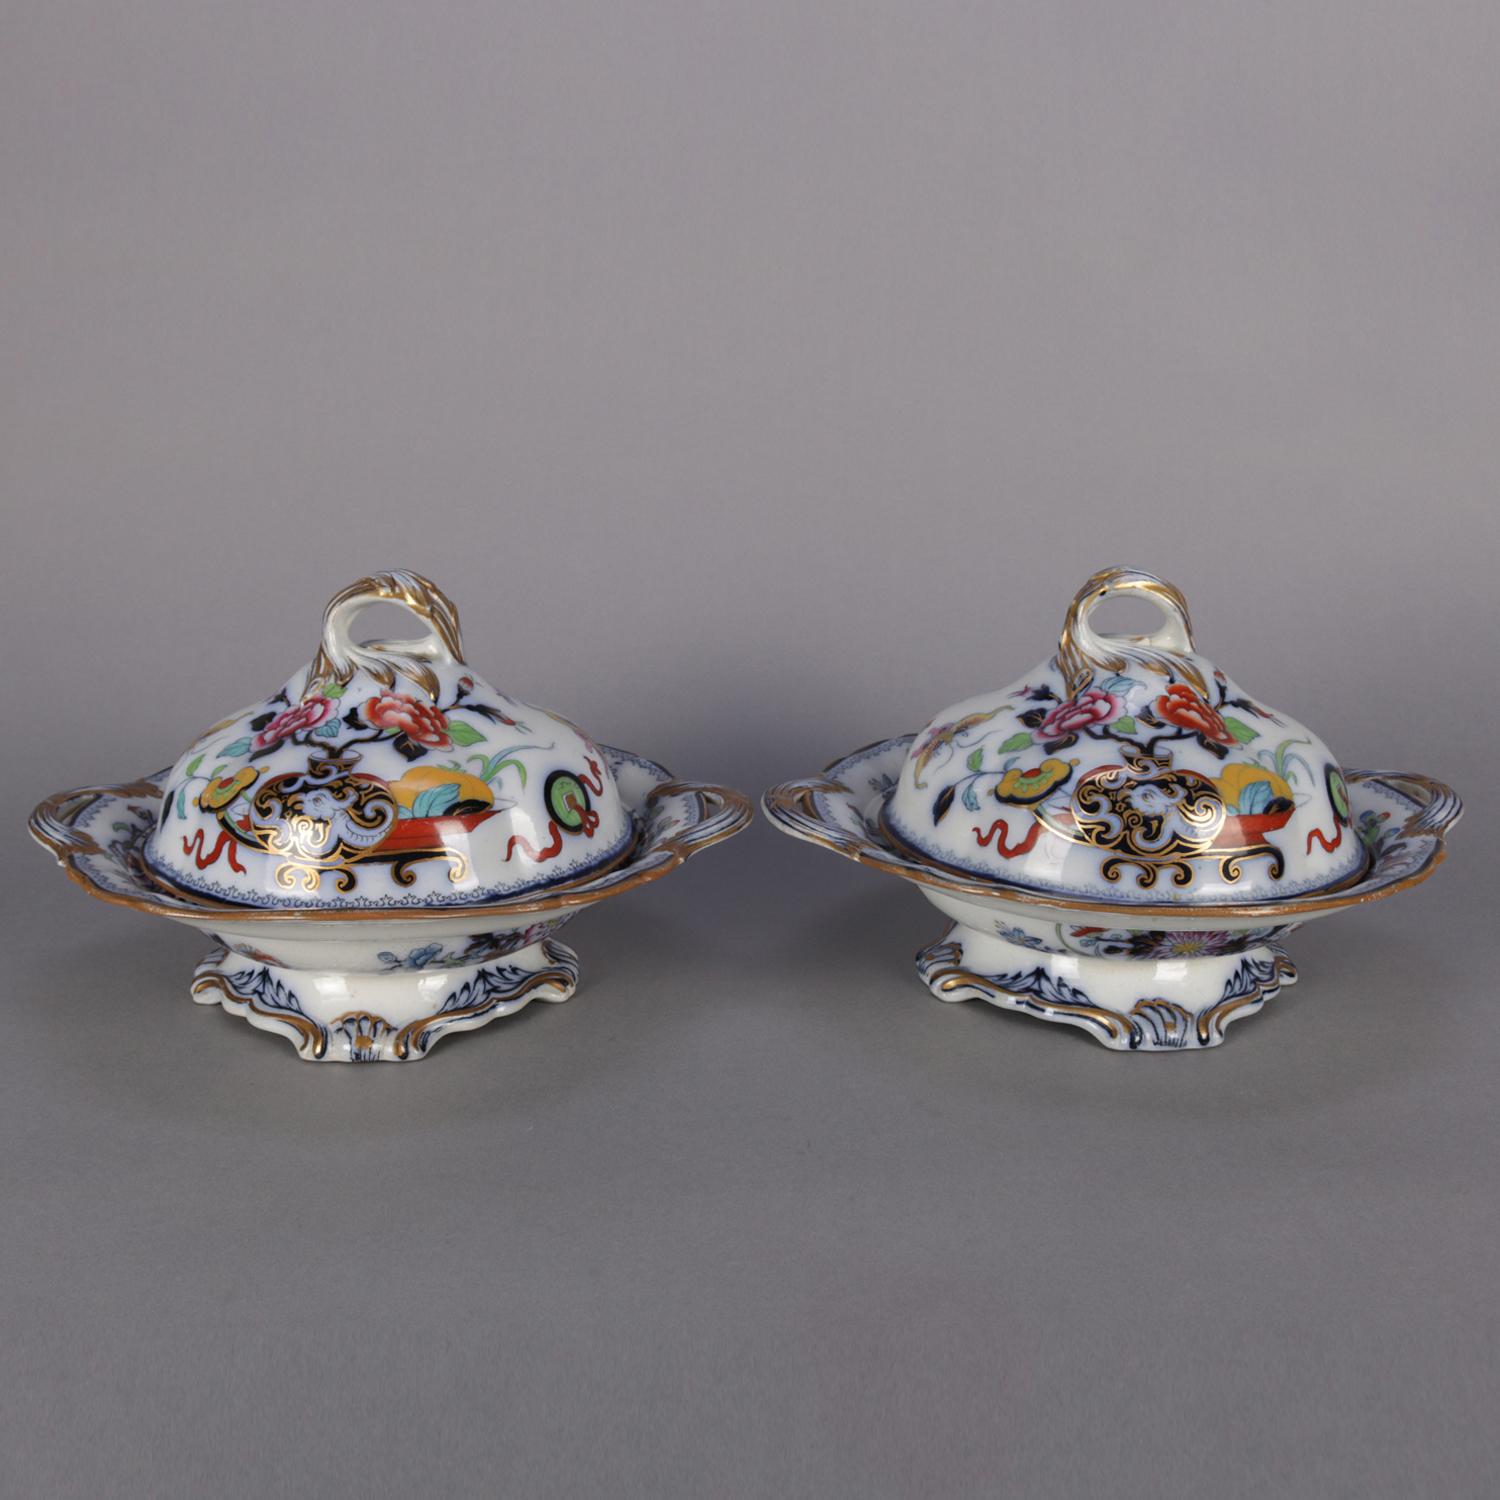 19th Century Pair of Antique English Wedgwood Noma Flow Blue and Gilt Porcelain Tureens